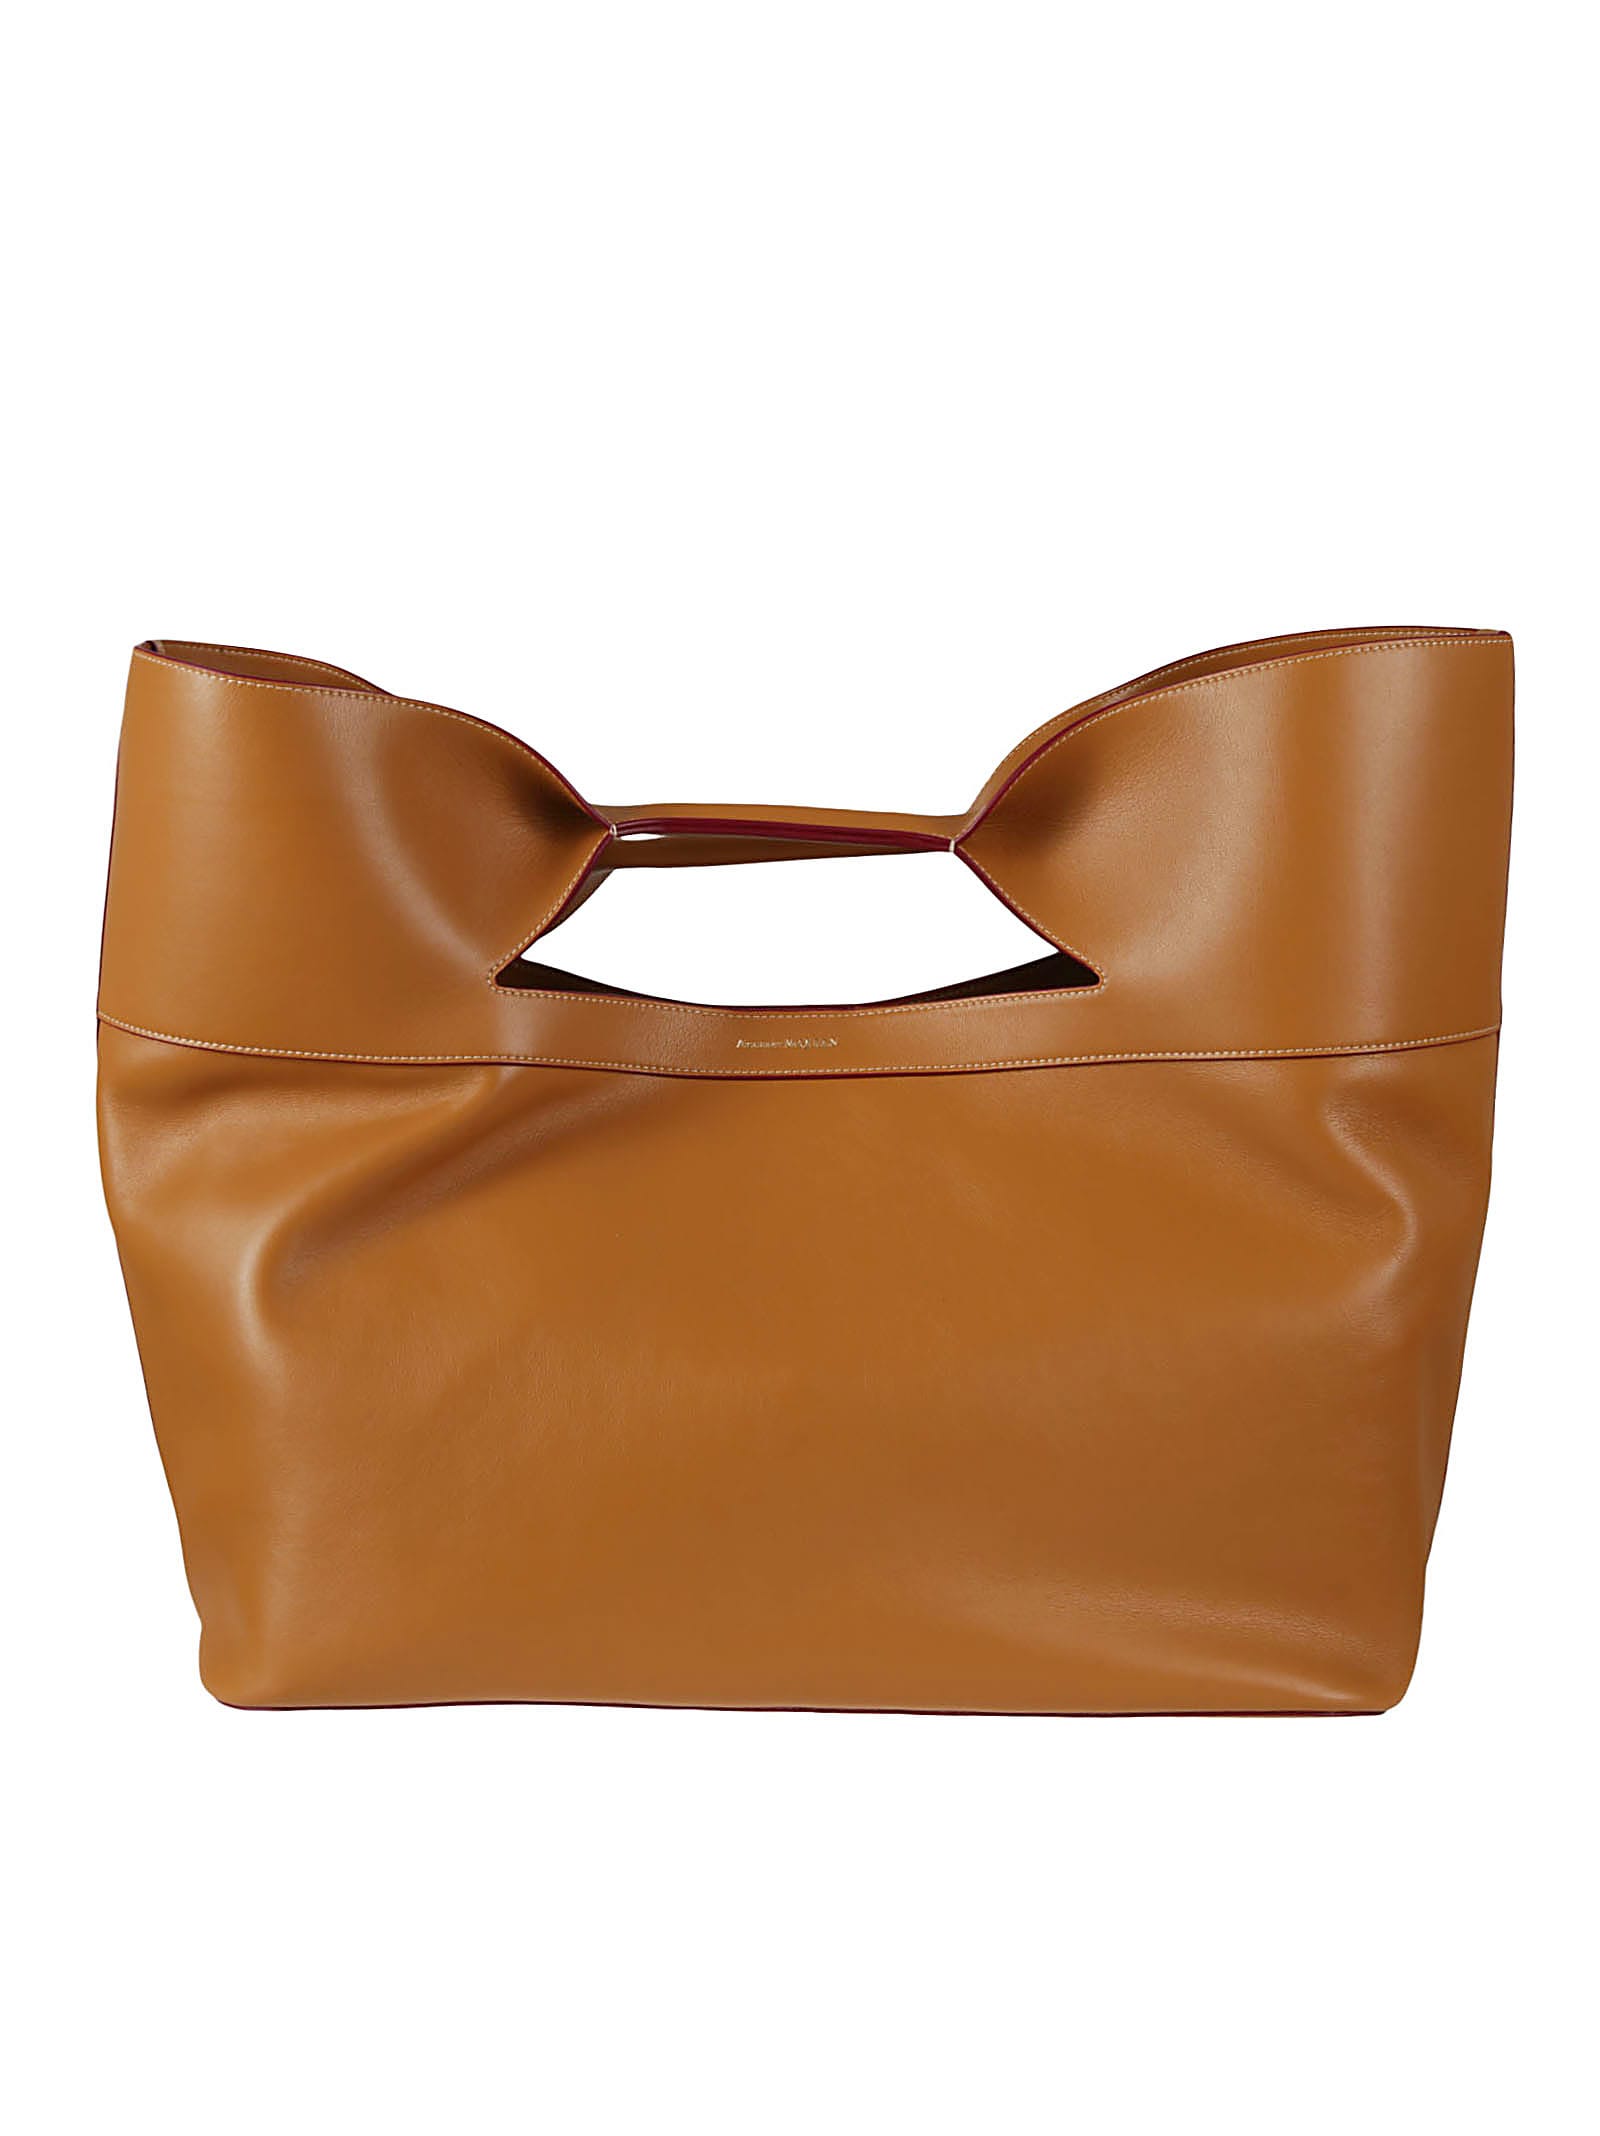 Alexander McQueen Large The Bow Tote